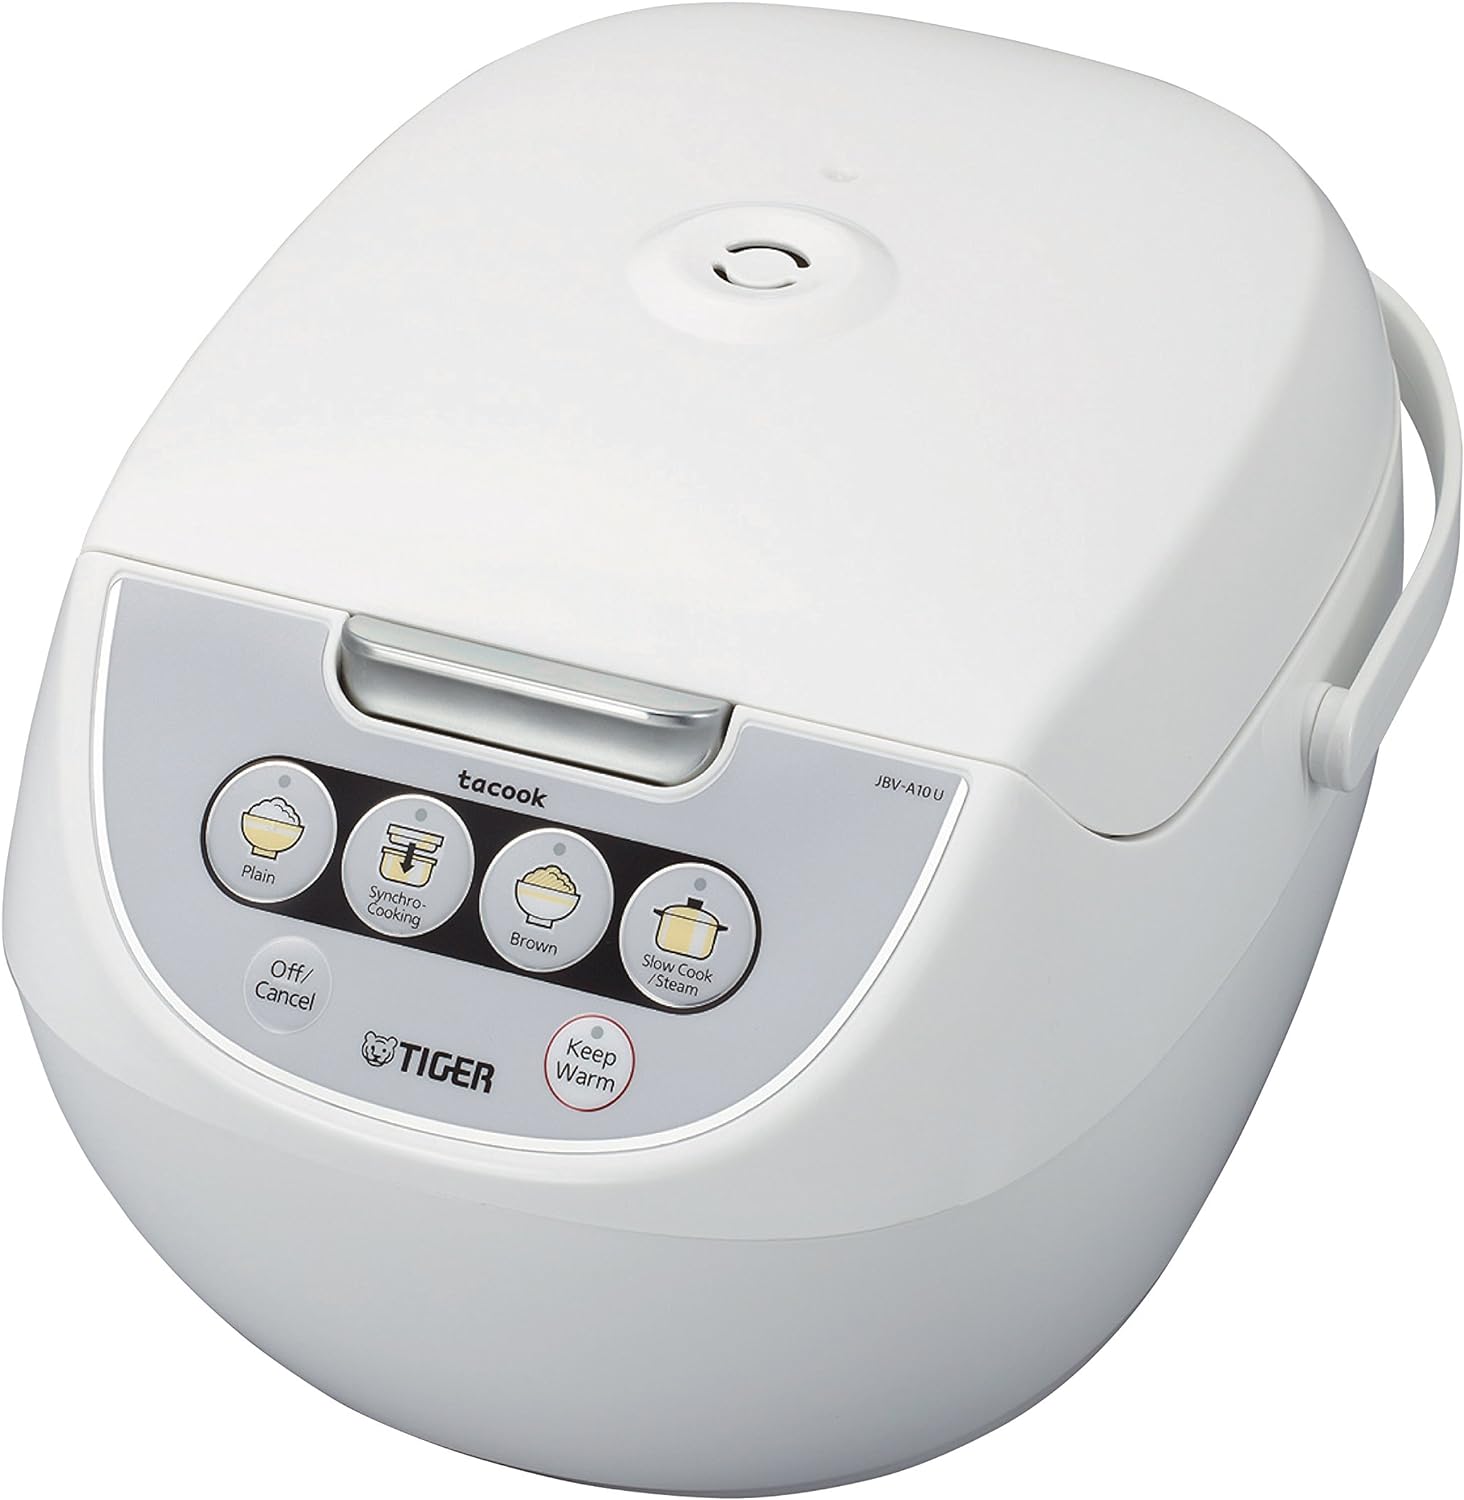 TIGER JBV A10U 5.5 Cup Uncooked Micom Rice Cooker with Food Steamer